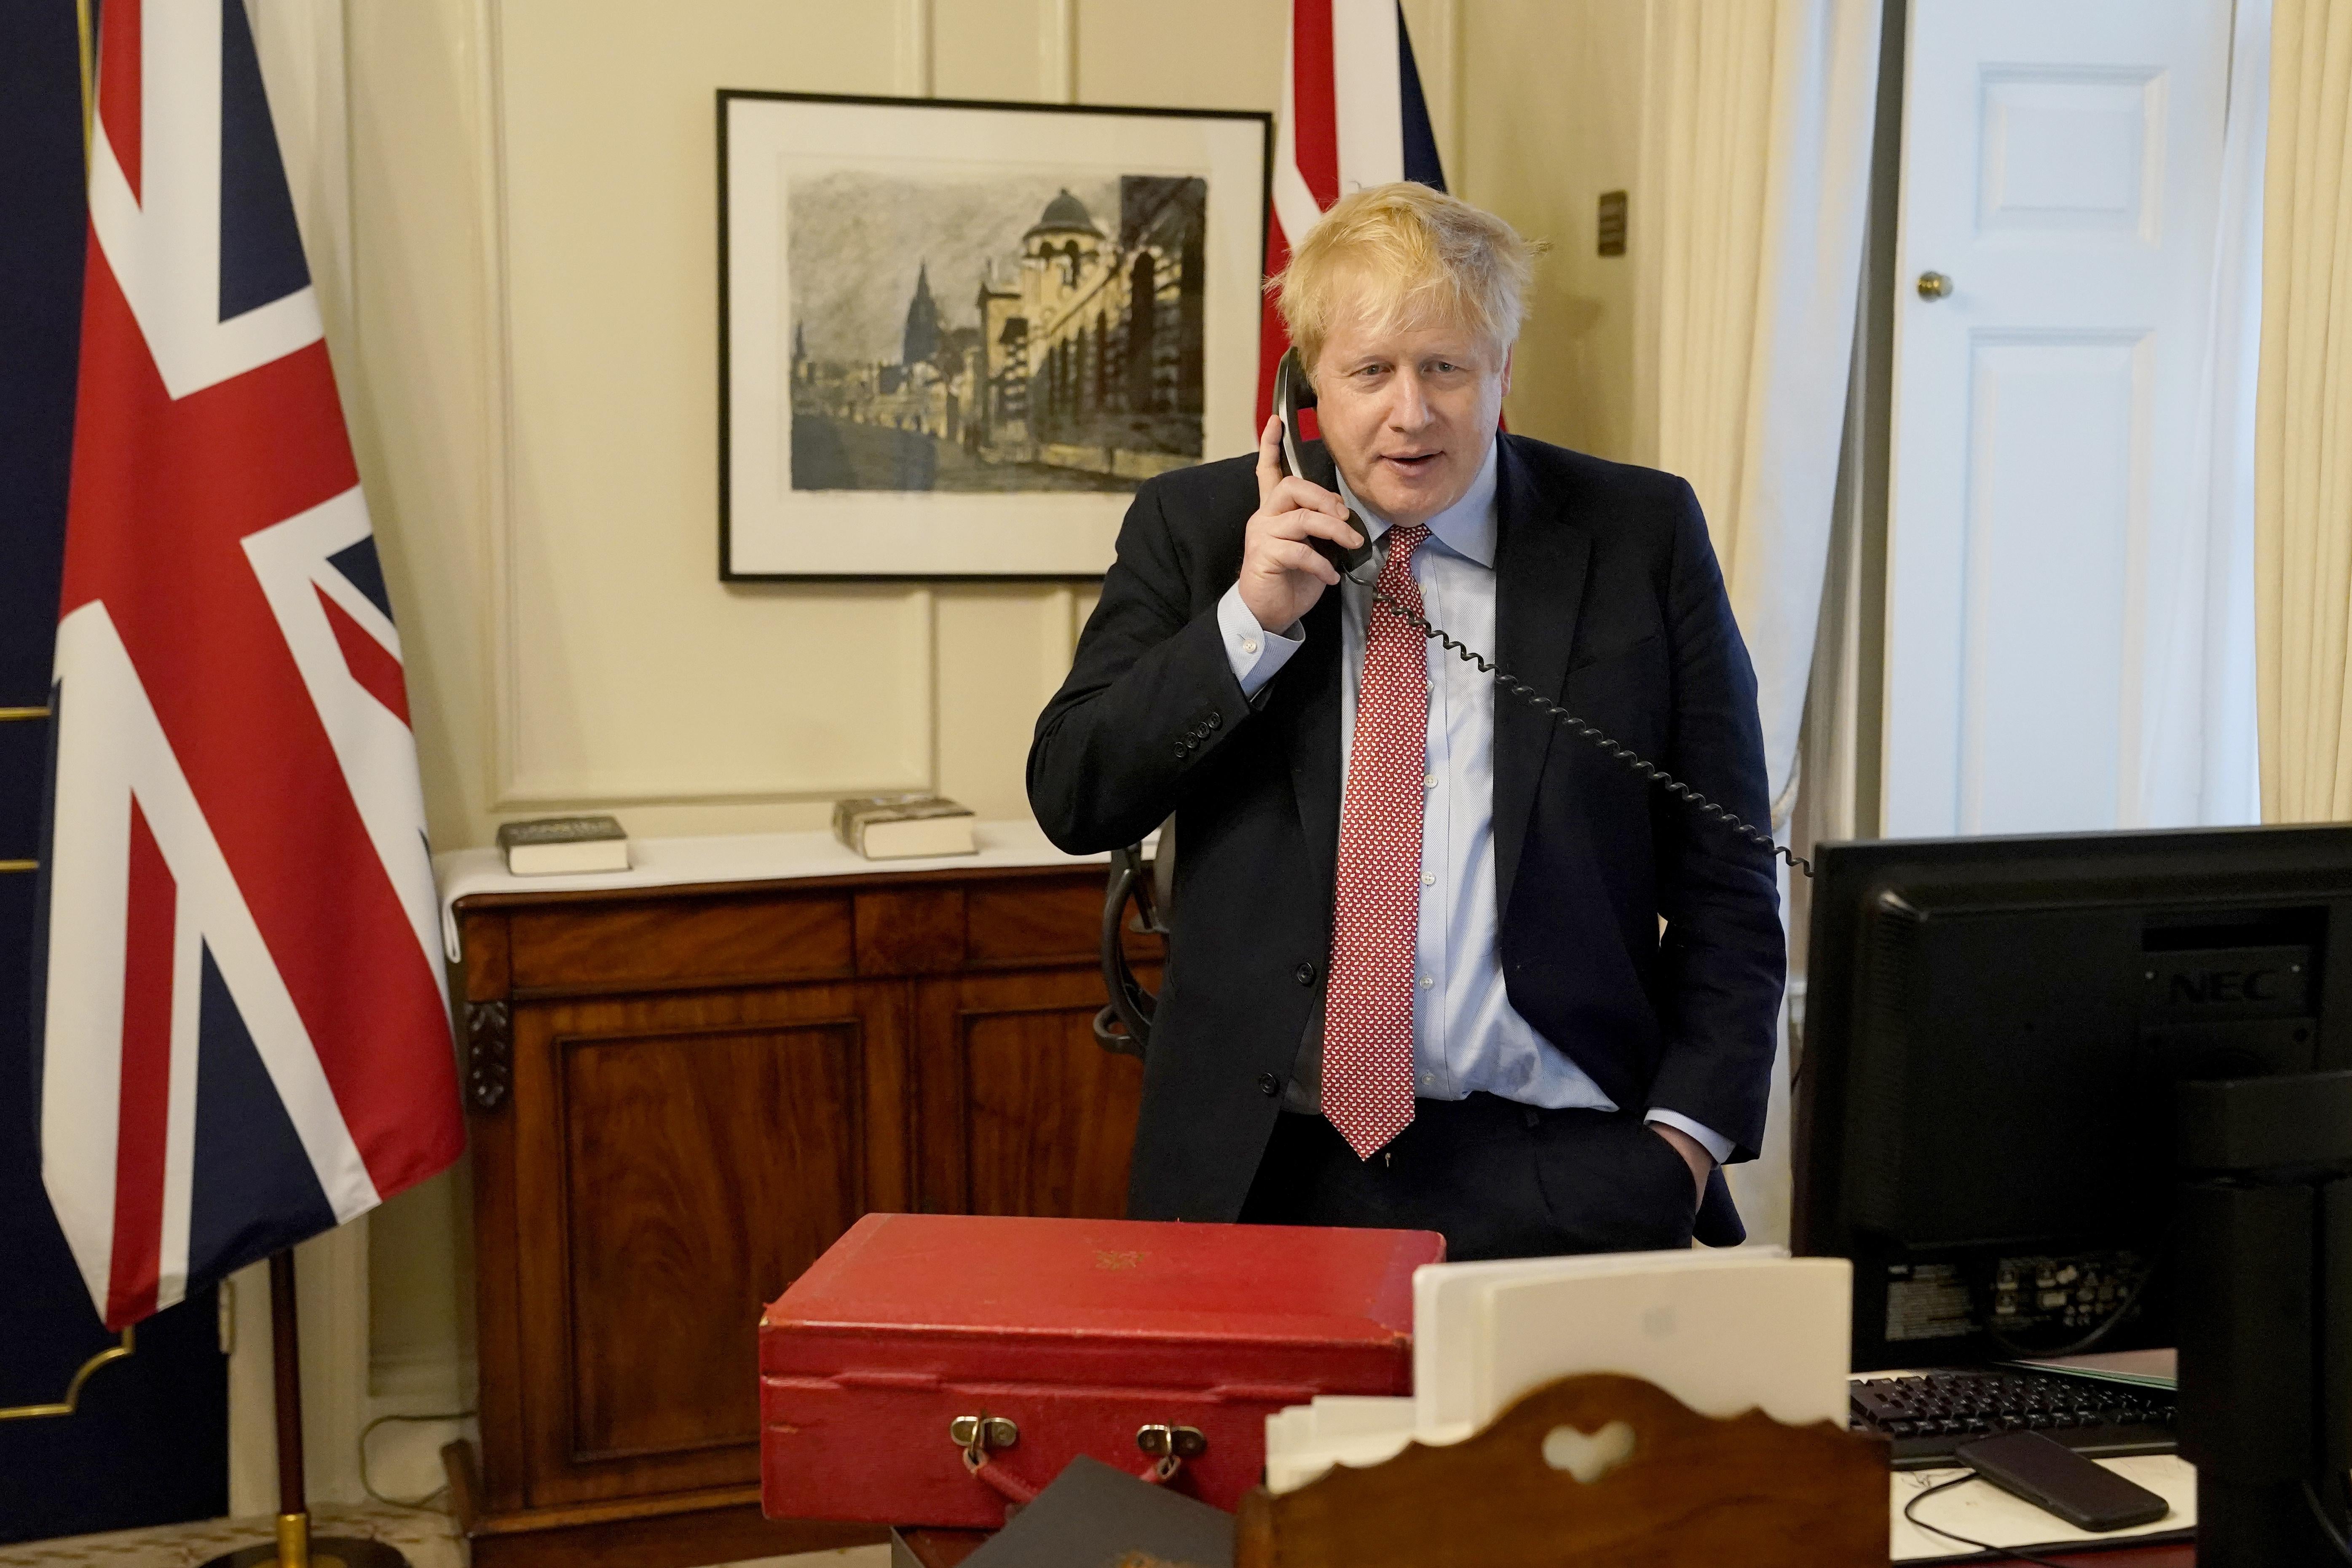 Boris Johnson stands in an office, talking on a telephone.